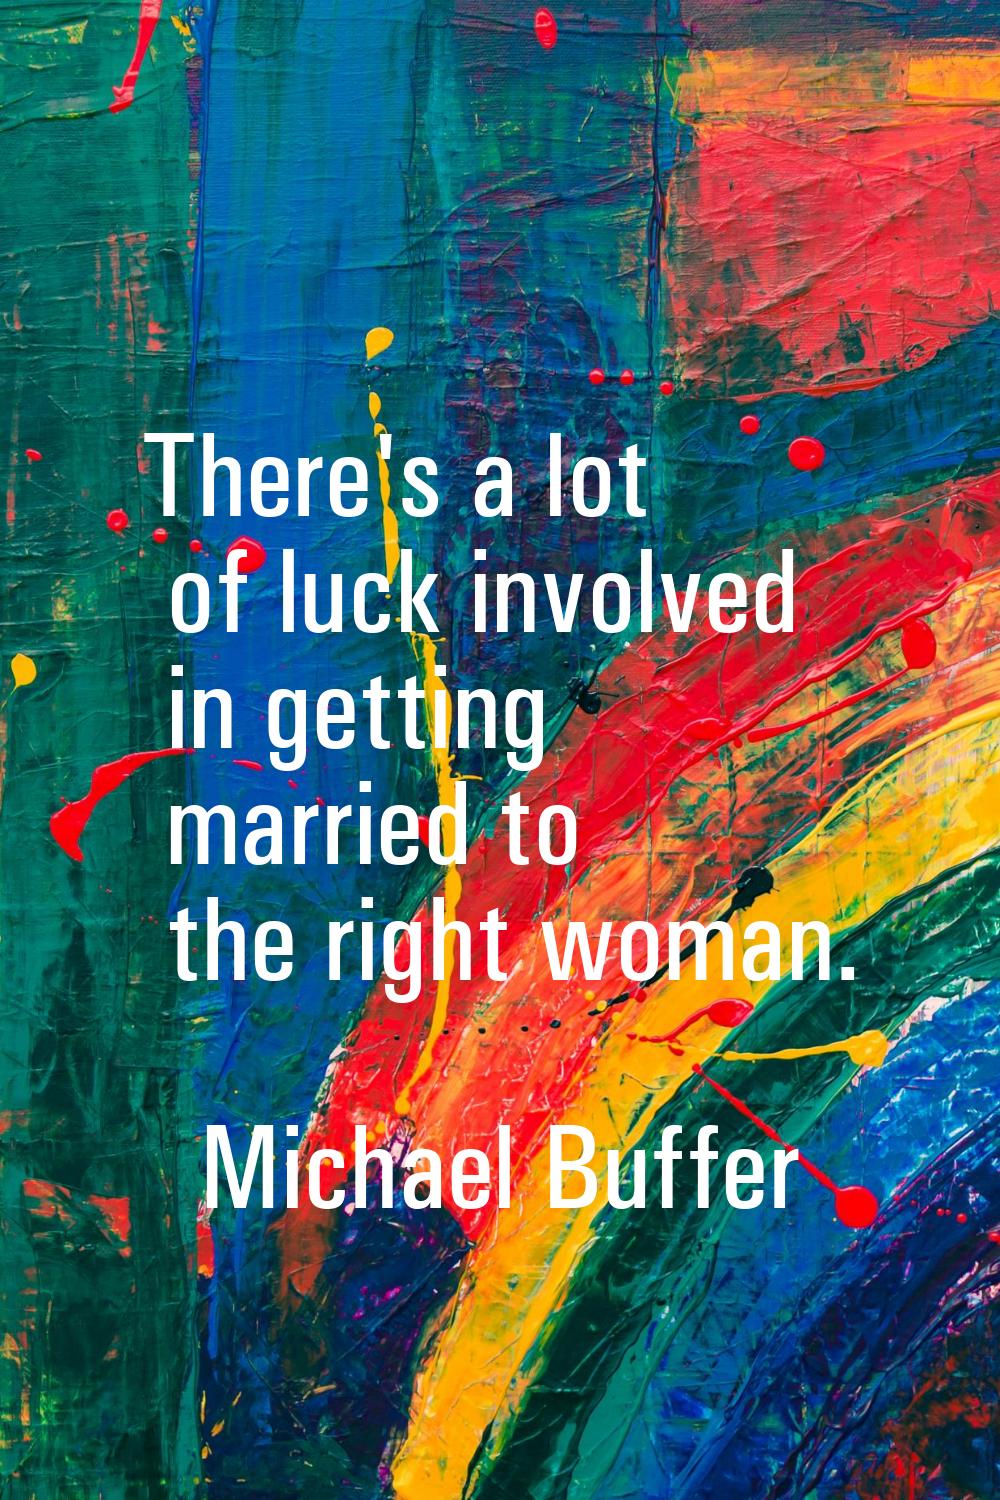 There's a lot of luck involved in getting married to the right woman.